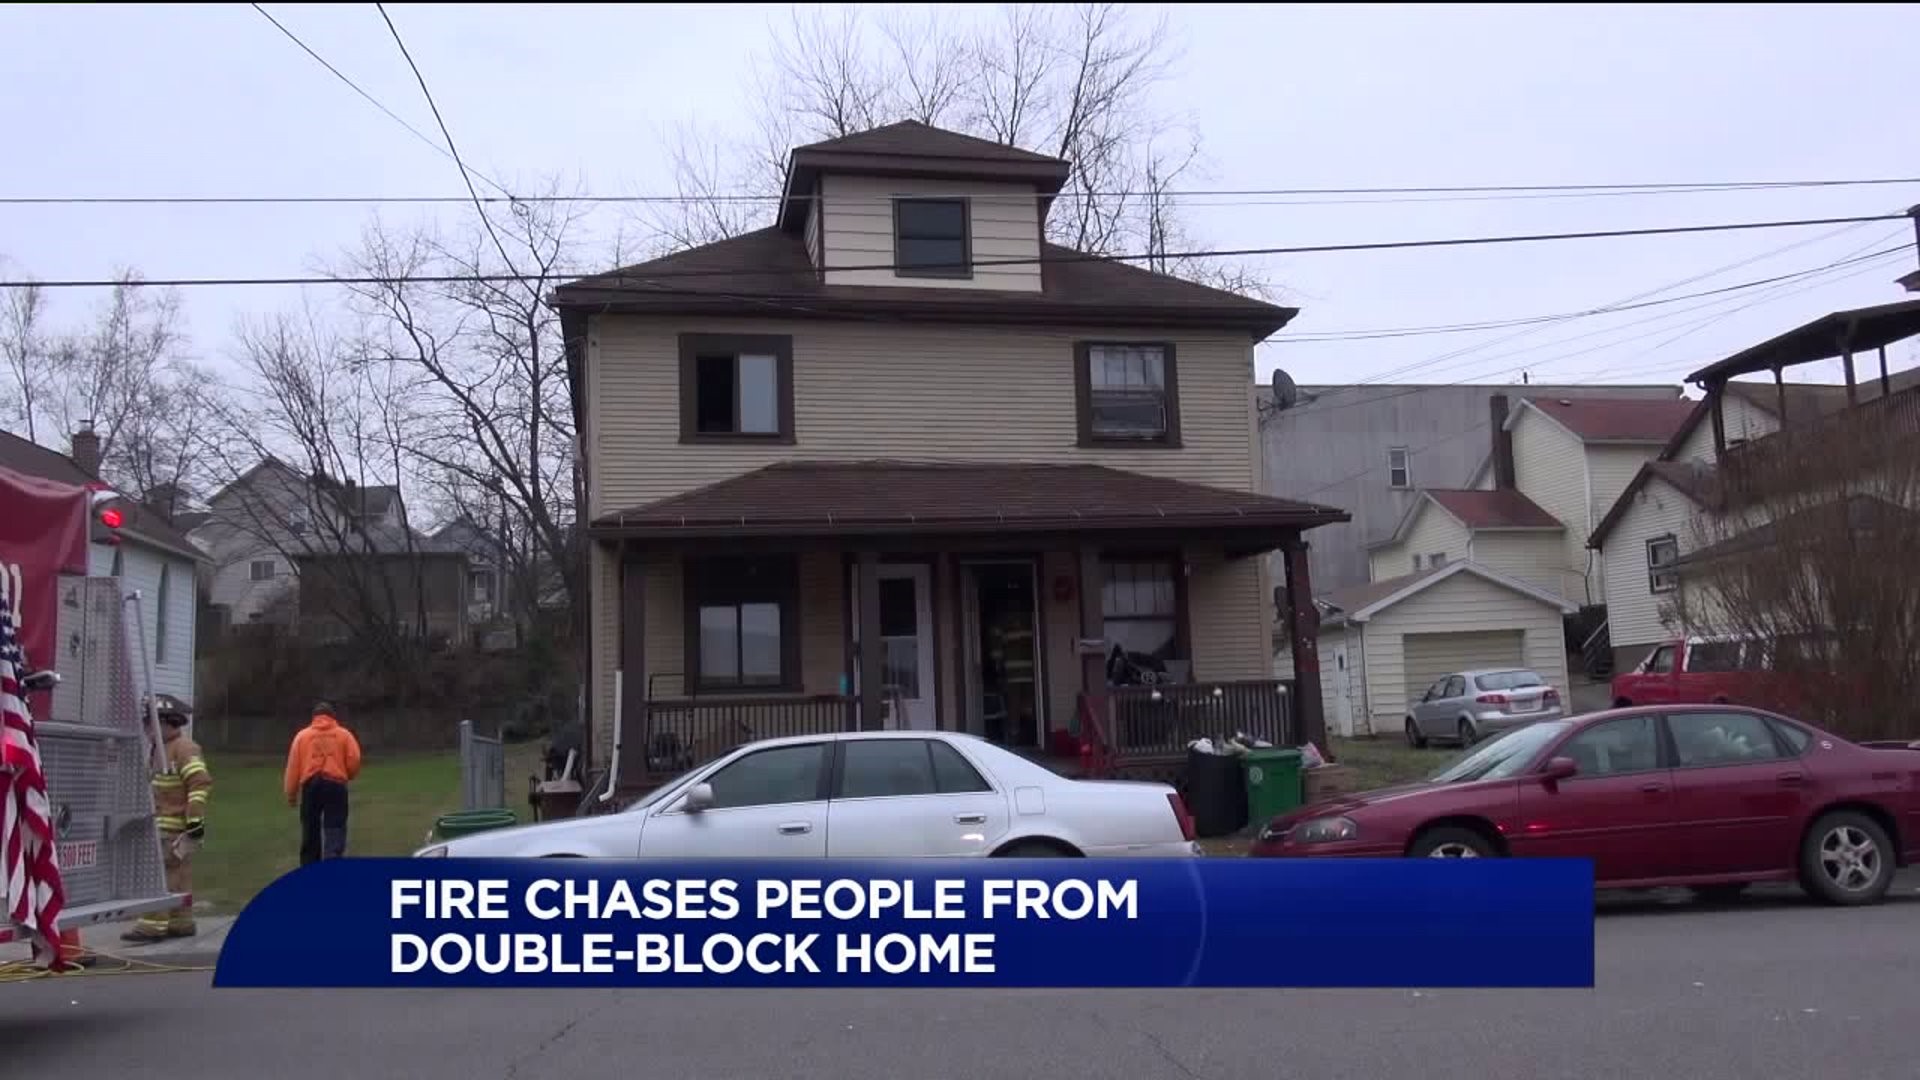 Fire Chases Nine People from Double-Block Home in Jessup